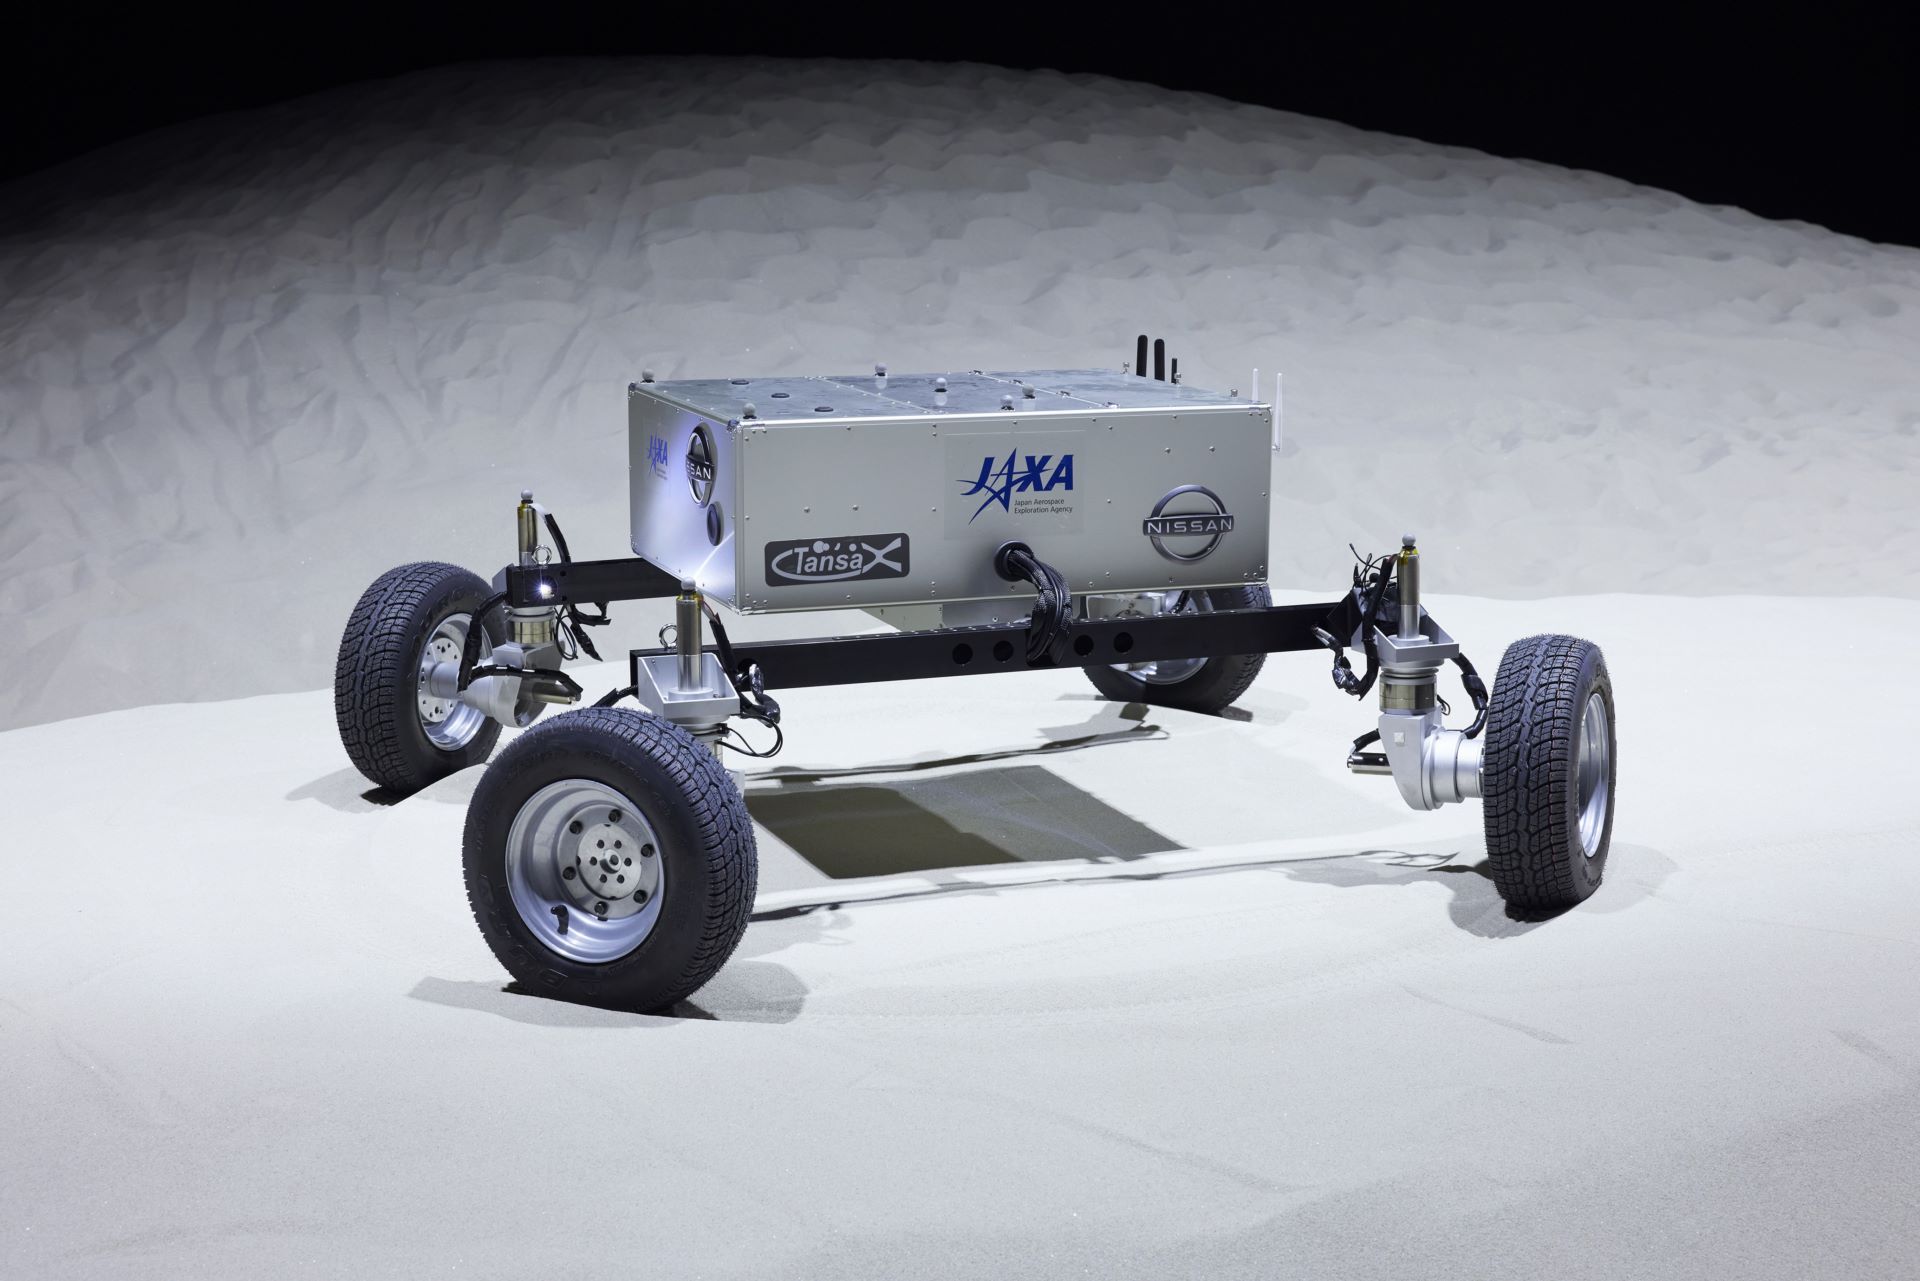 Nissan unveils lunar rover prototype jointly developed with Japan Aerospace Exploration Agency